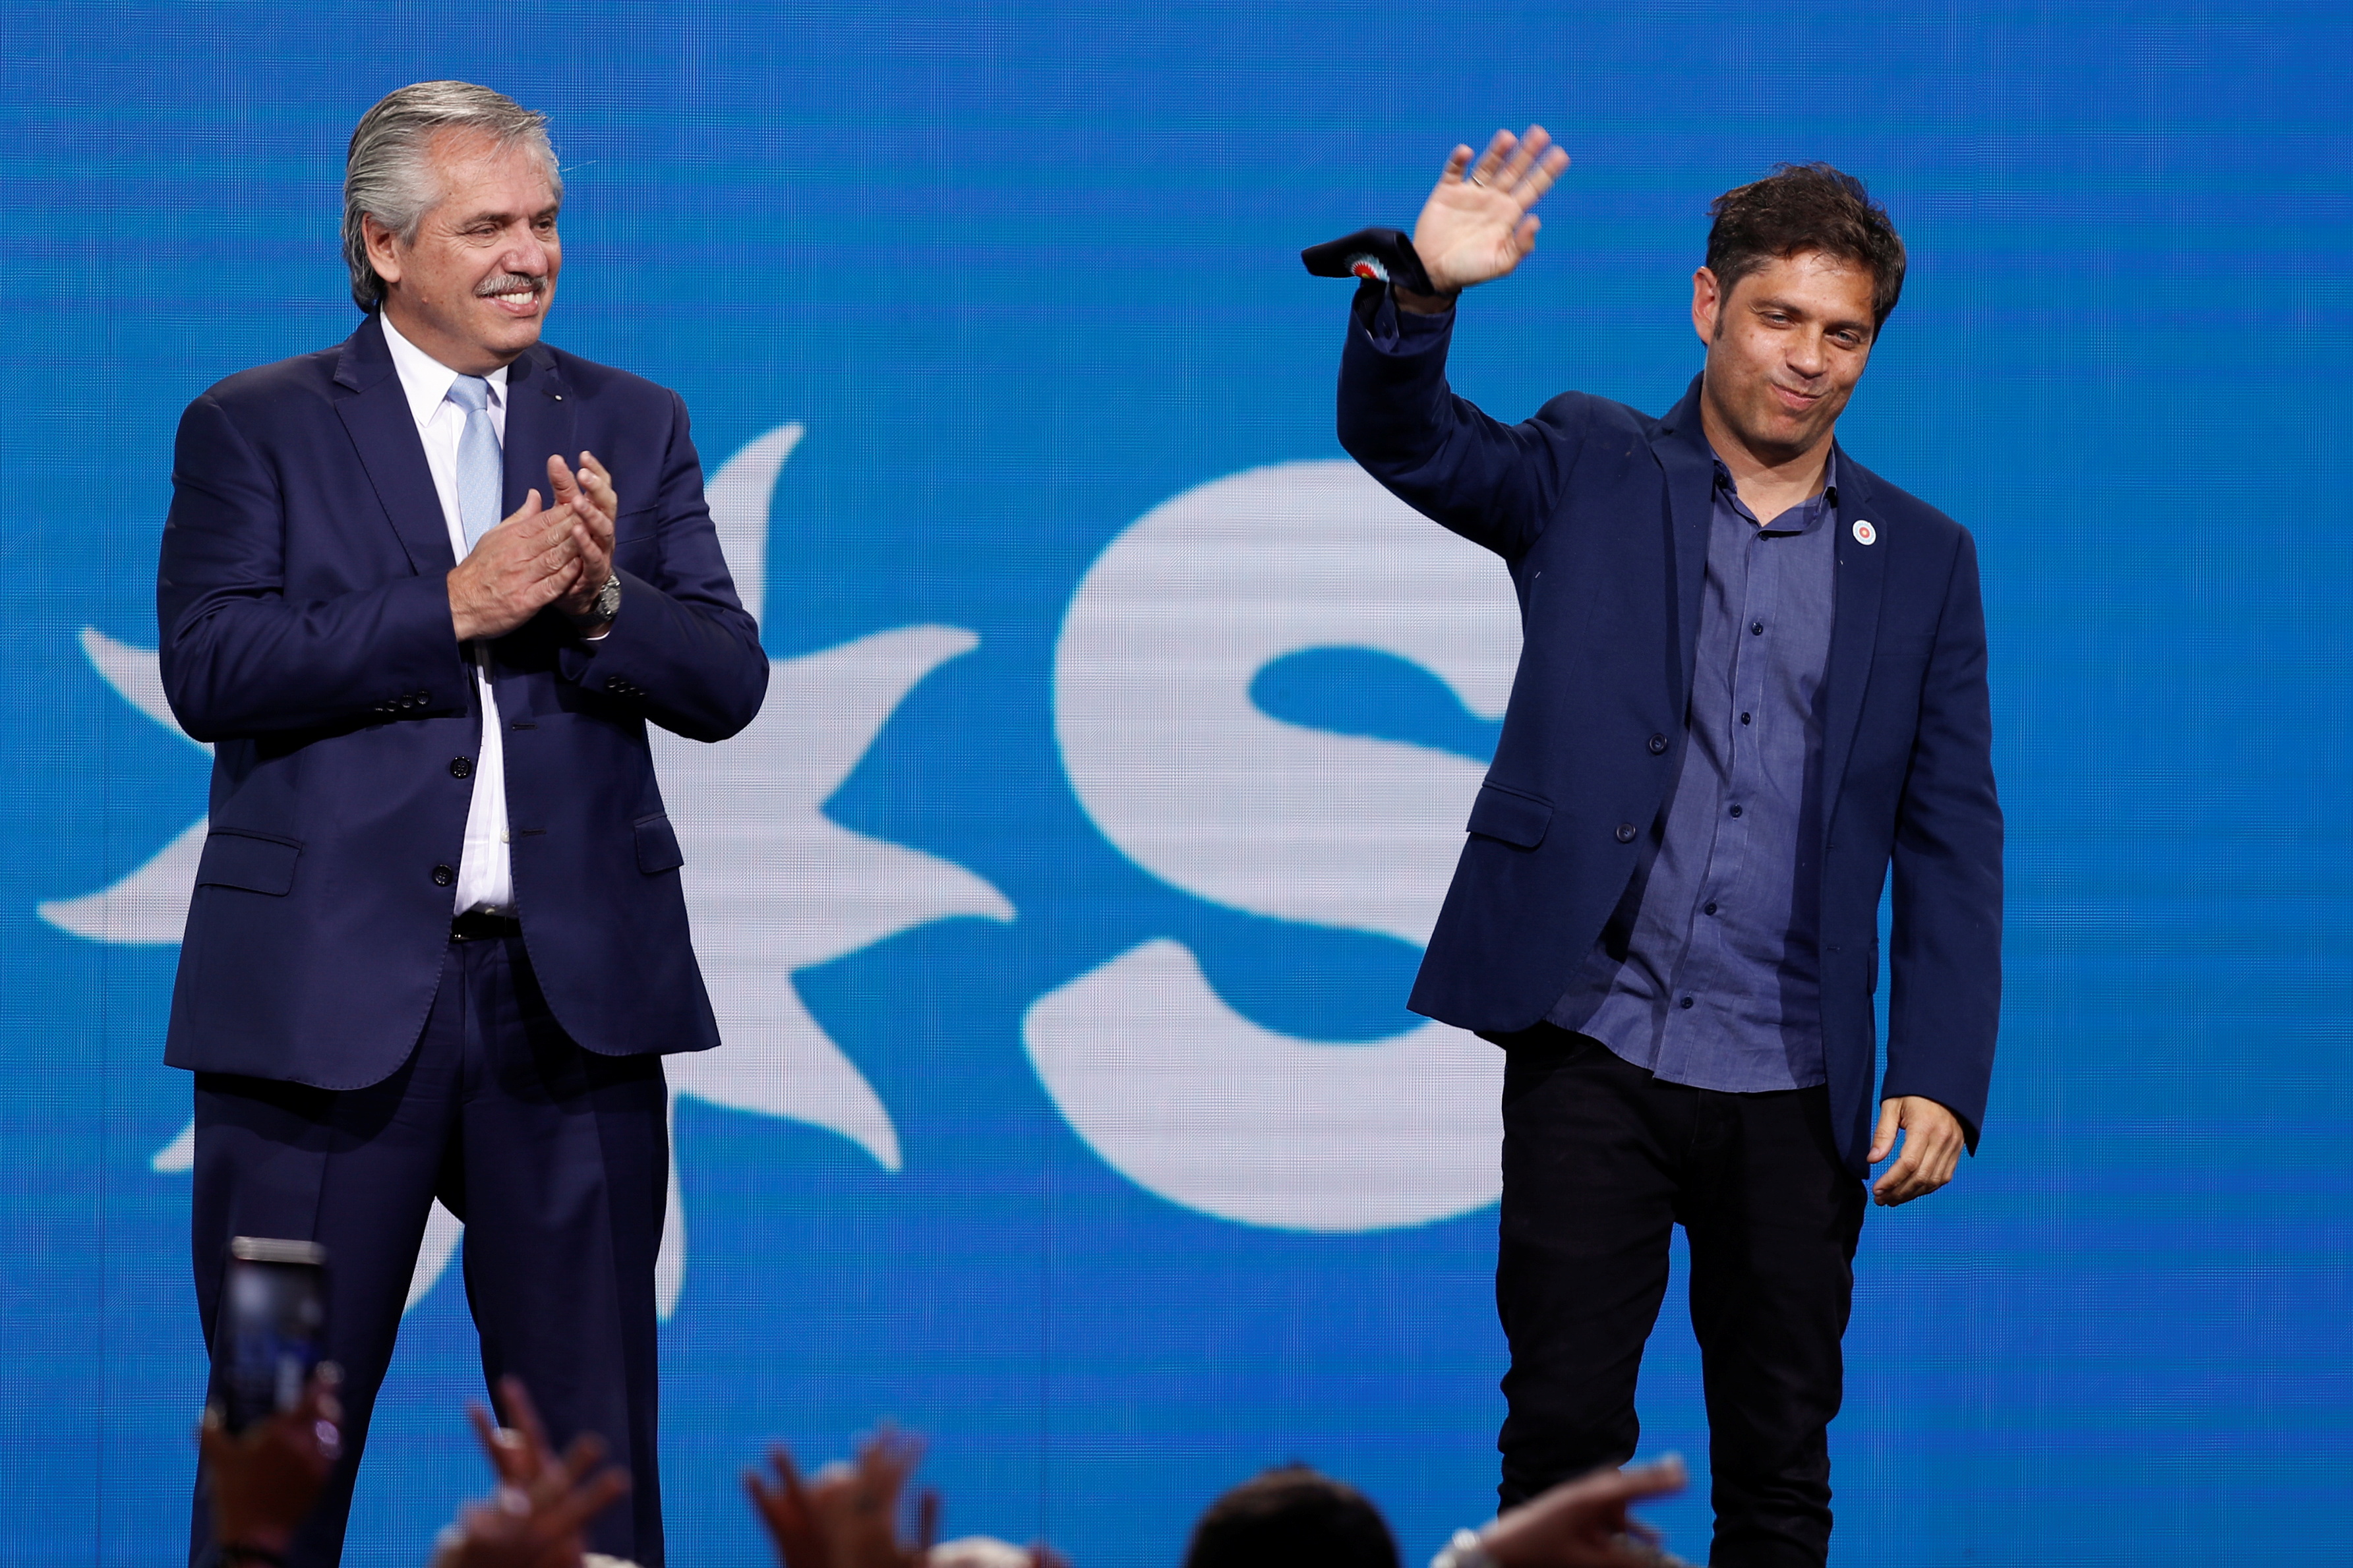 Argentina's President Alberto Fernandez and Governor of Buenos Aires province Axel Kicillof attend an event after midterm elections in Buenos Aires, Argentina, November 14, 2021. REUTERS/Agustin Marcarian